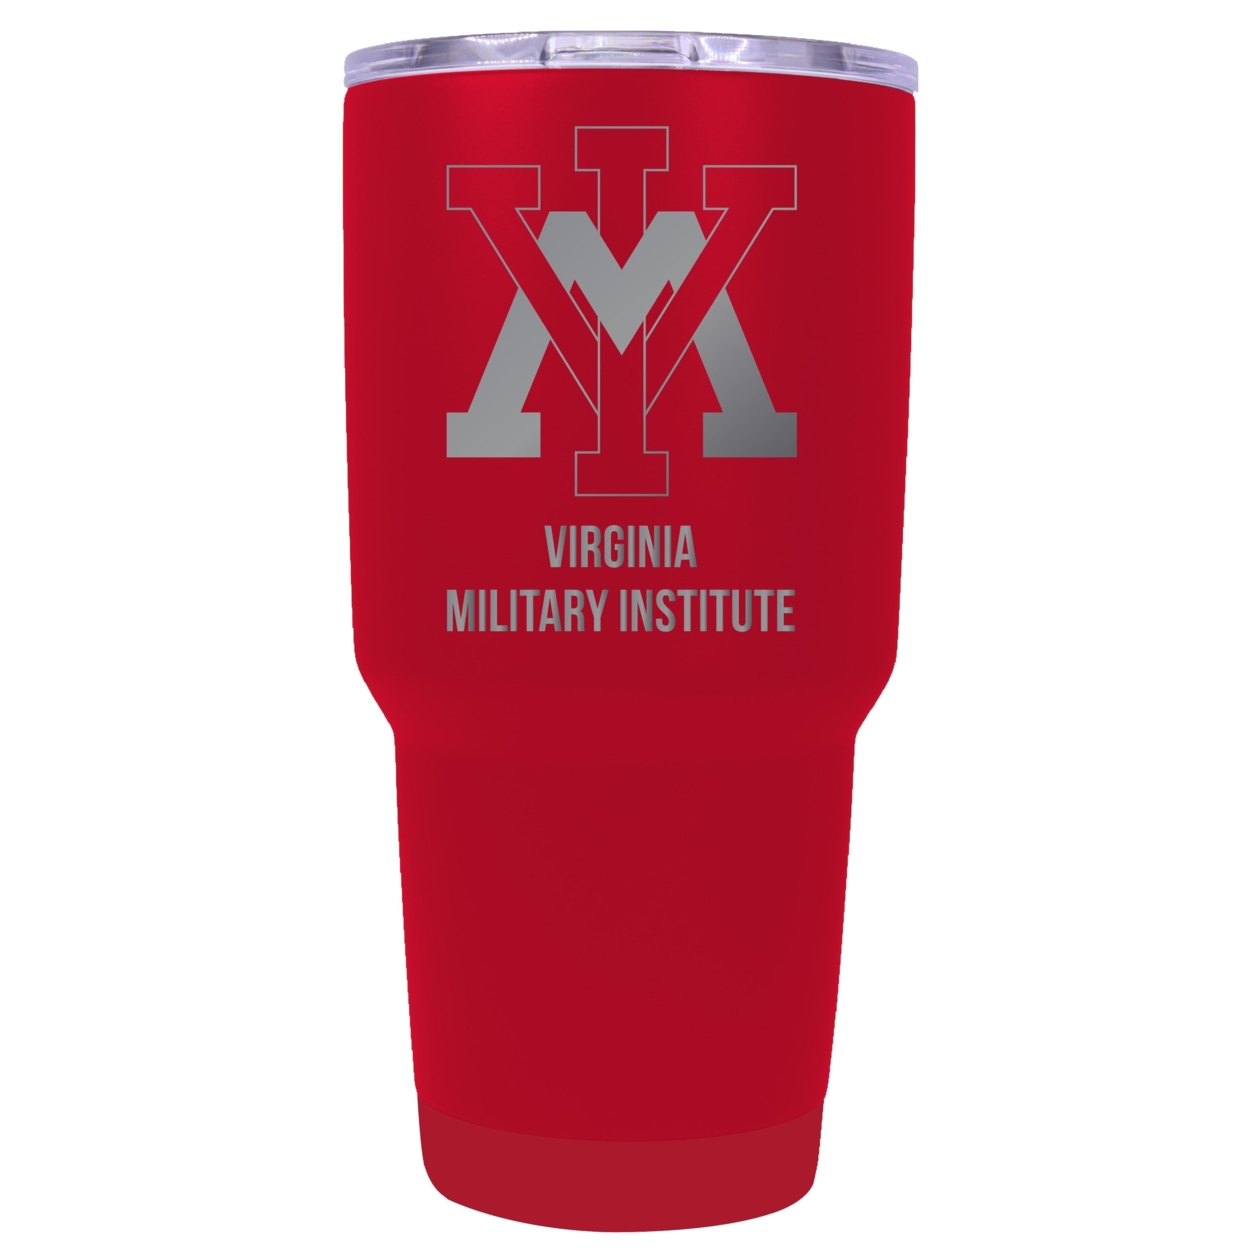 VMI Keydets 24 Oz Laser Engraved Stainless Steel Insulated Tumbler - Choose Your Color. - Coral